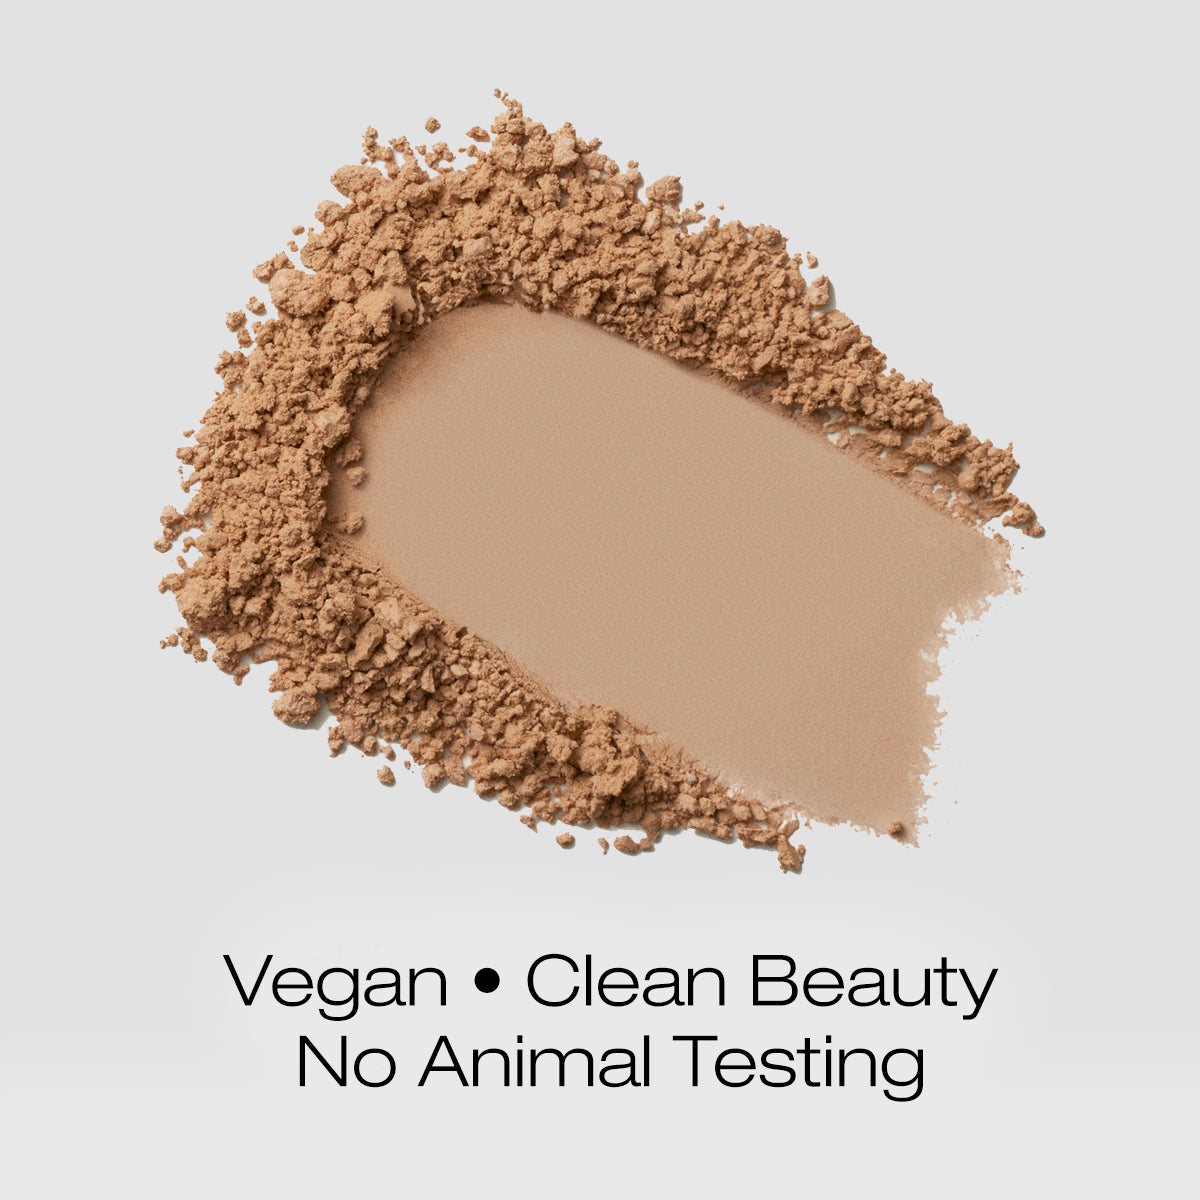 a swatch of tan colored foundation powder indicating that the formula is vegan, clean beauty and is not tested on animals